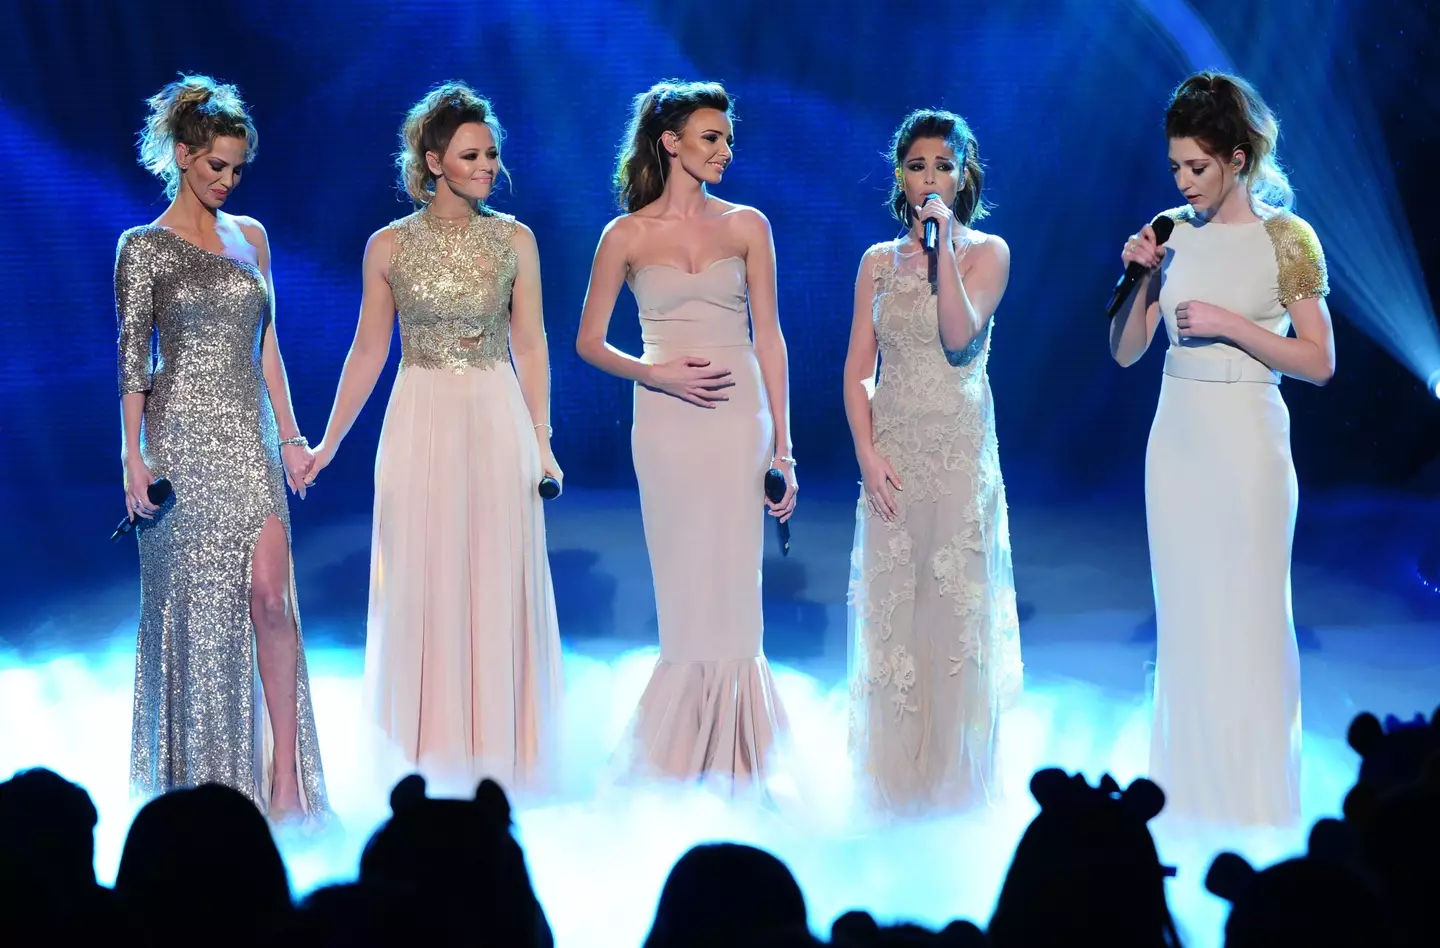 Her former Girls Aloud bandmates have paid tribute (